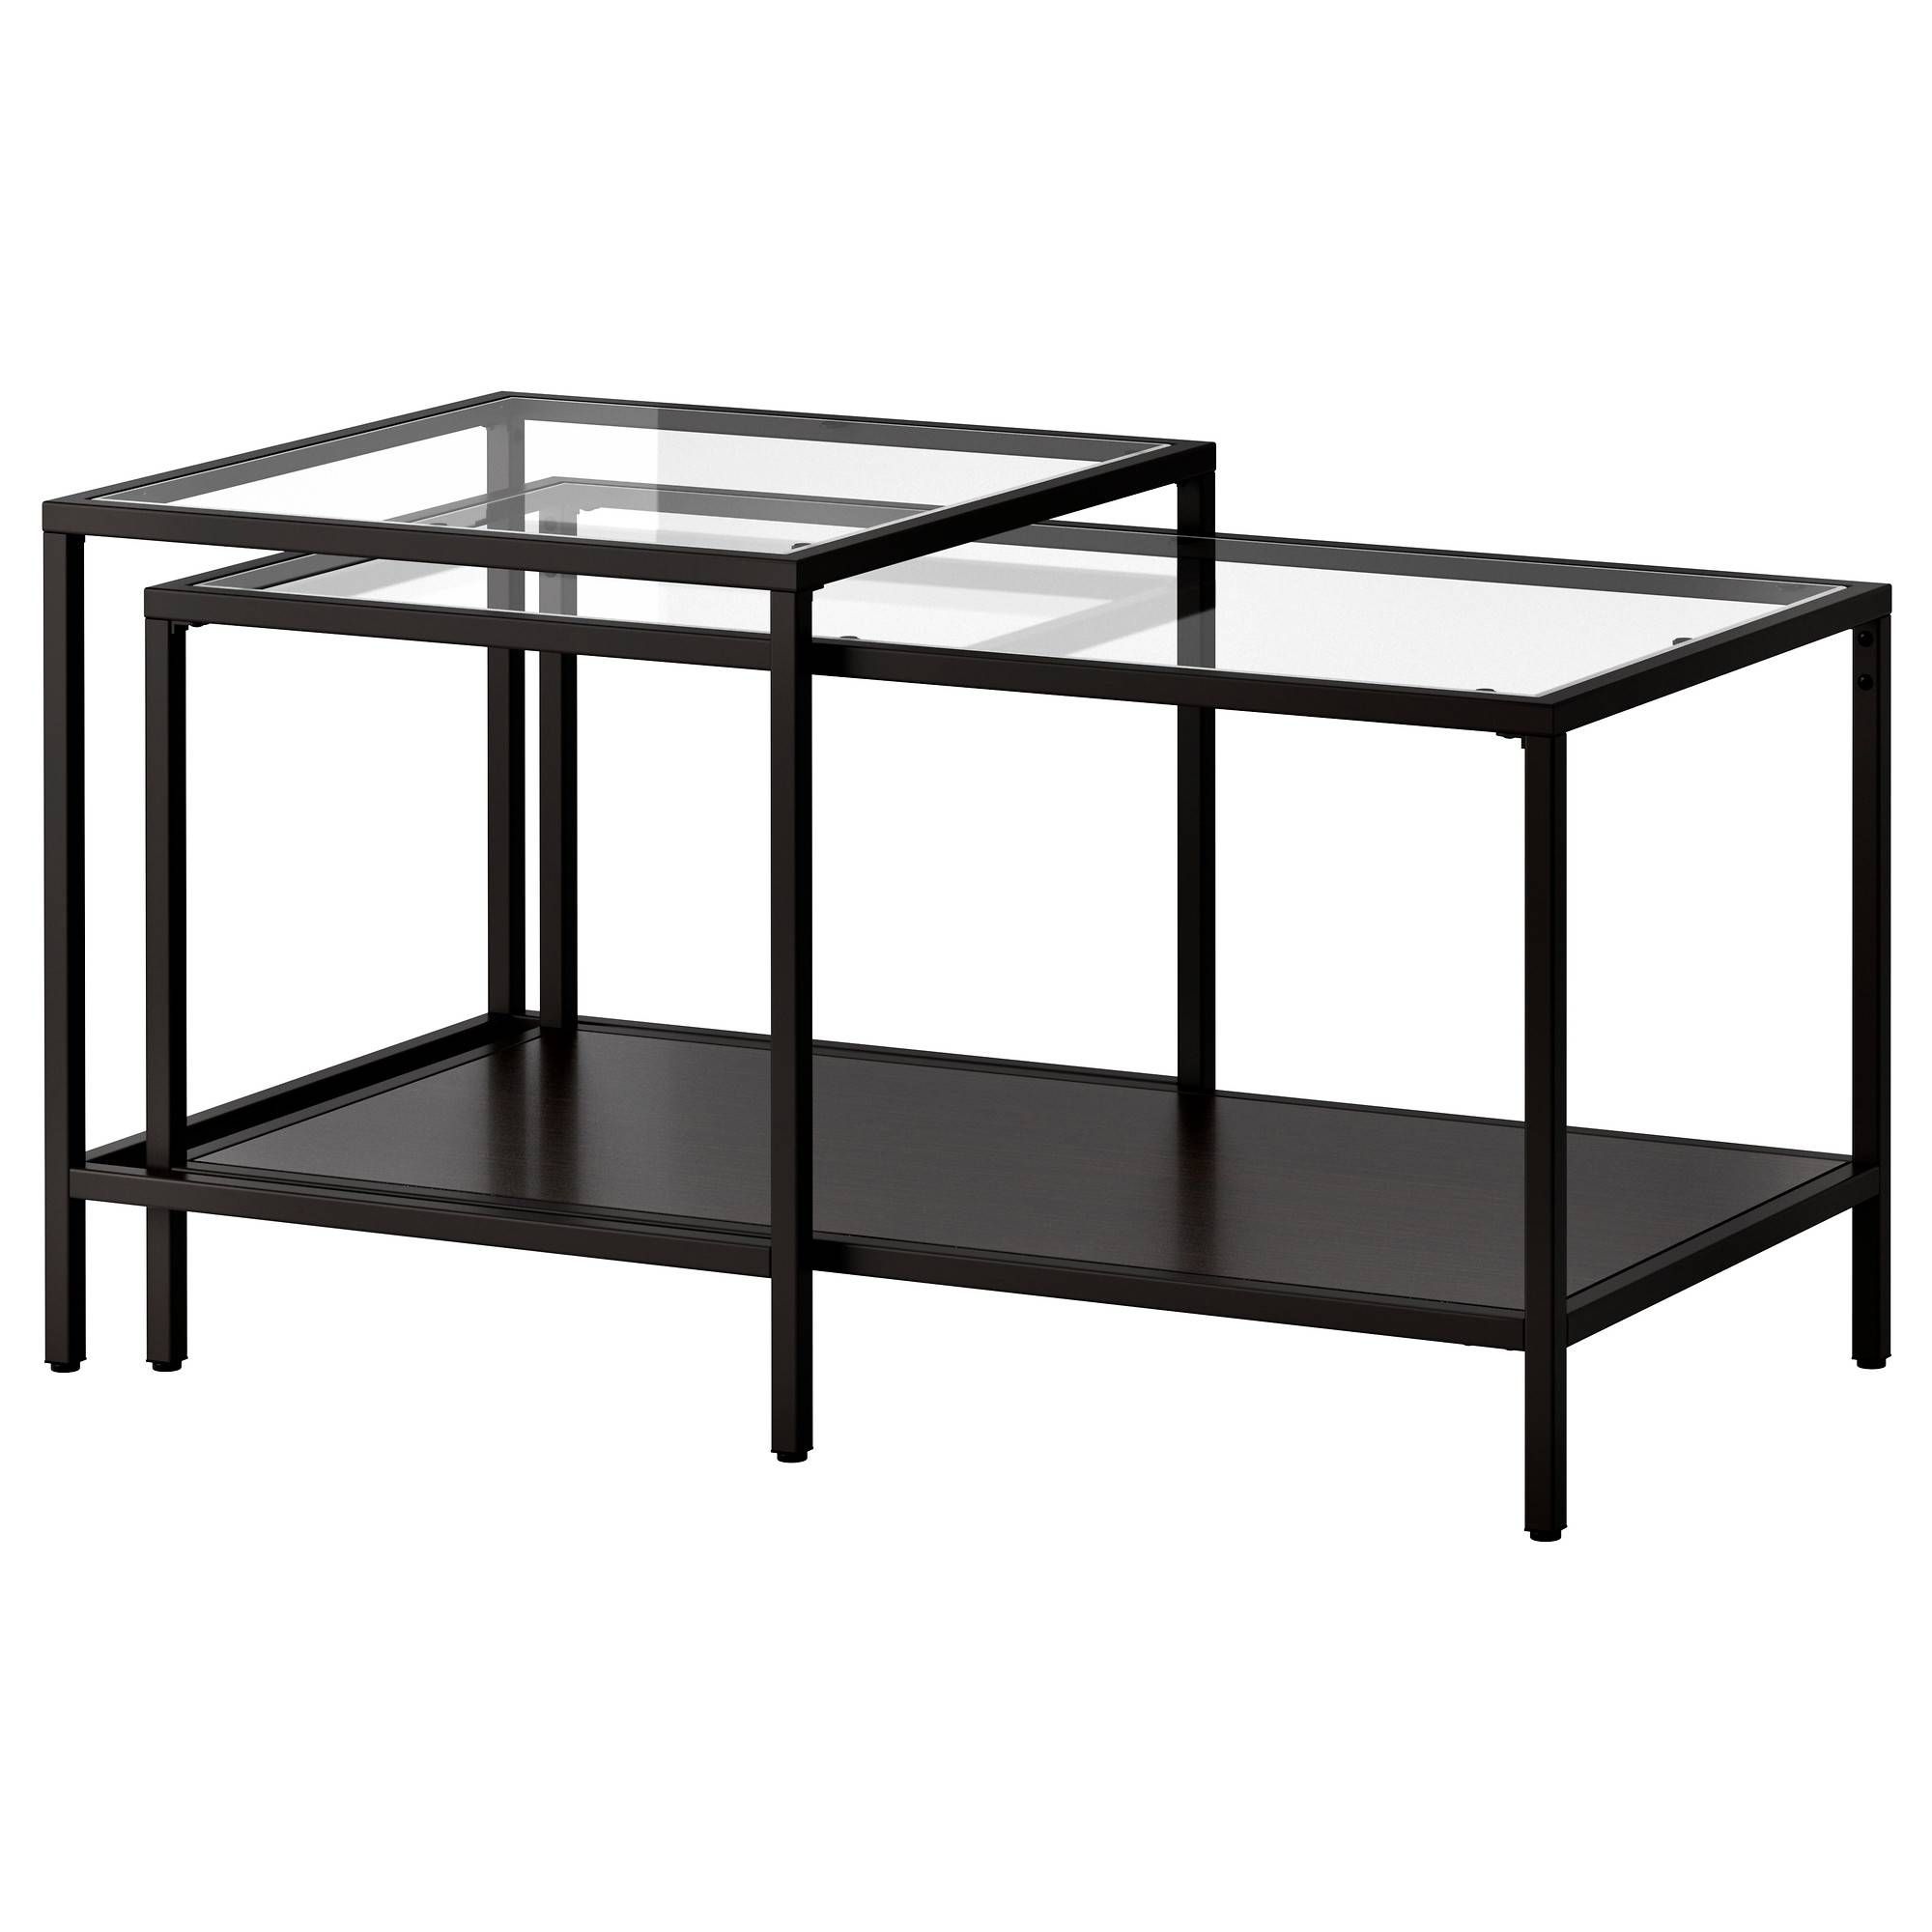 Vittsjö Nest Of Tables, Set Of 2 Black Brown/glass 90x50 Cm – Ikea Within Nest Coffee Tables (View 30 of 30)